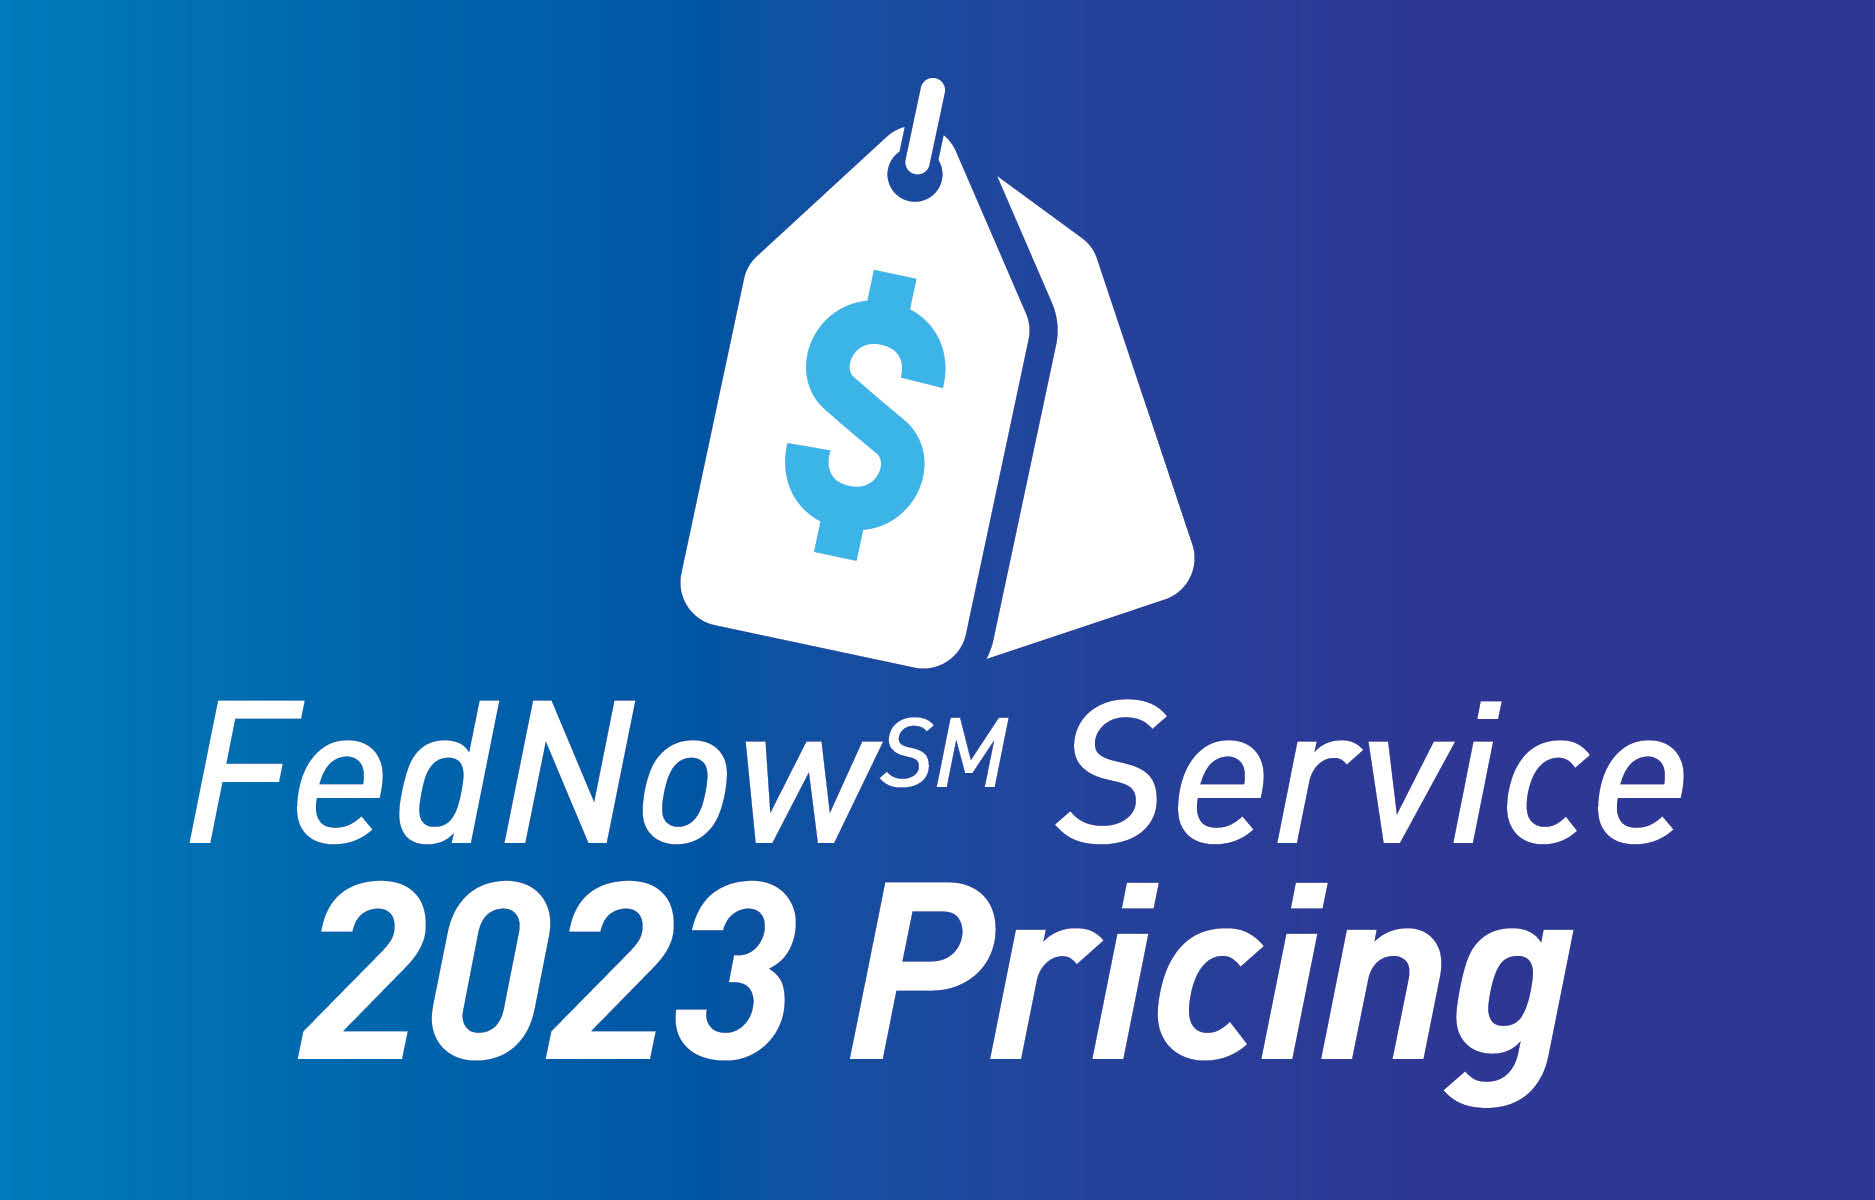 2023 FedNowSM Service Pricing Now Available